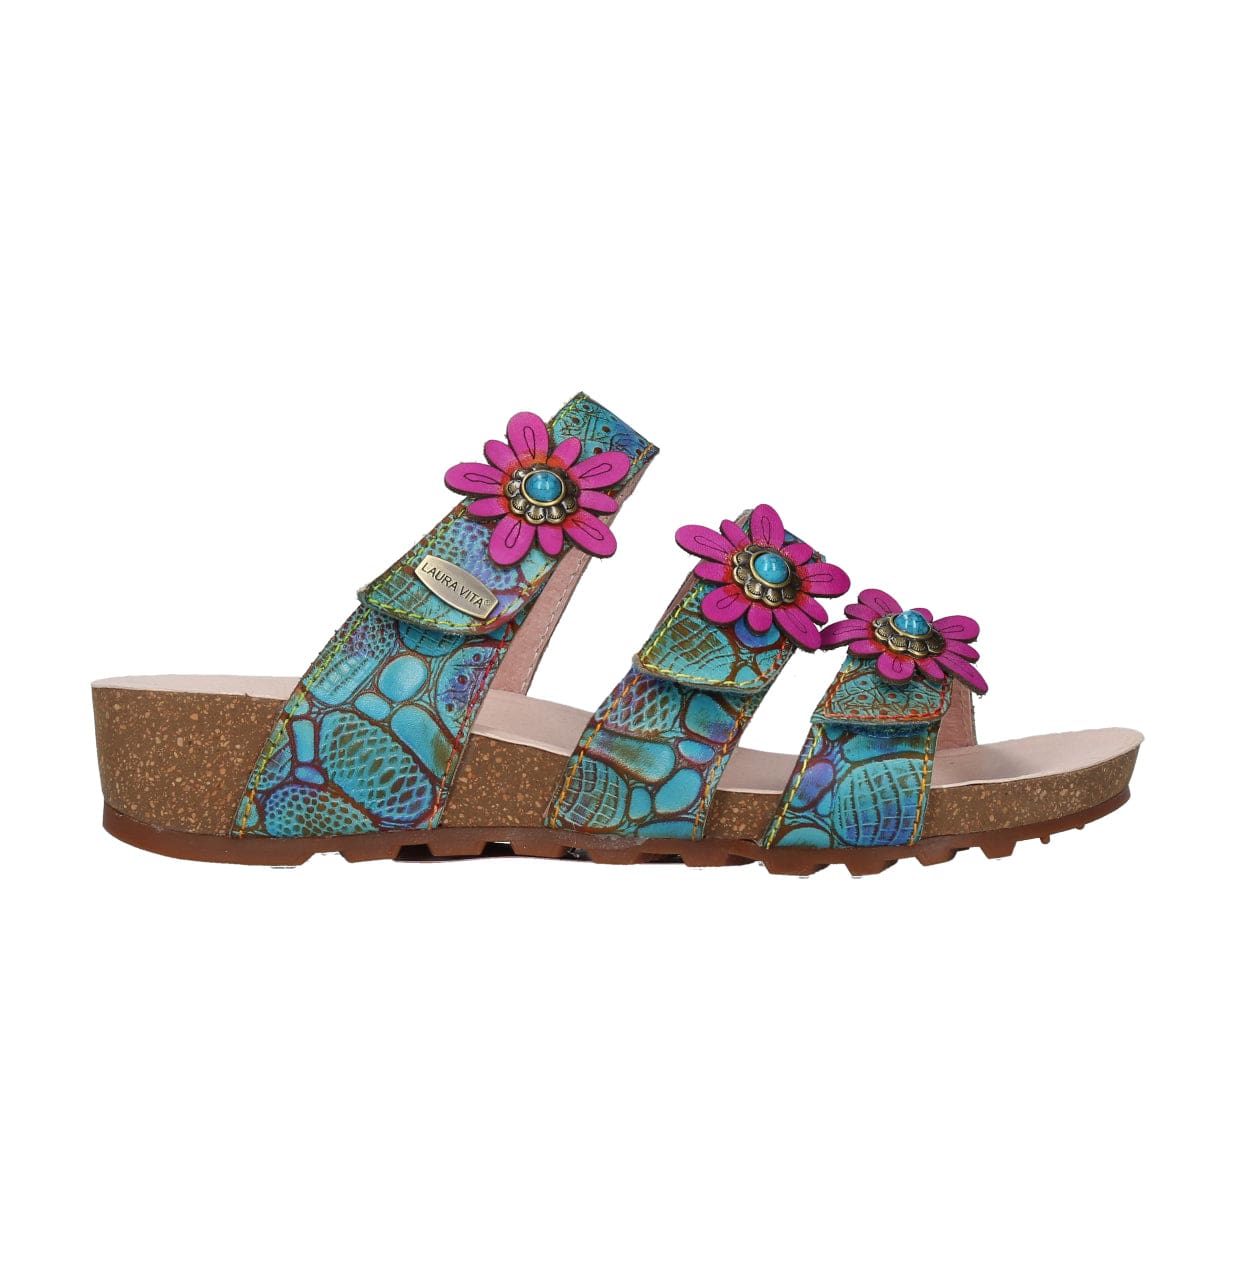 Chaussures BRCYANO 0122 - 35 / Turquoise - Mule